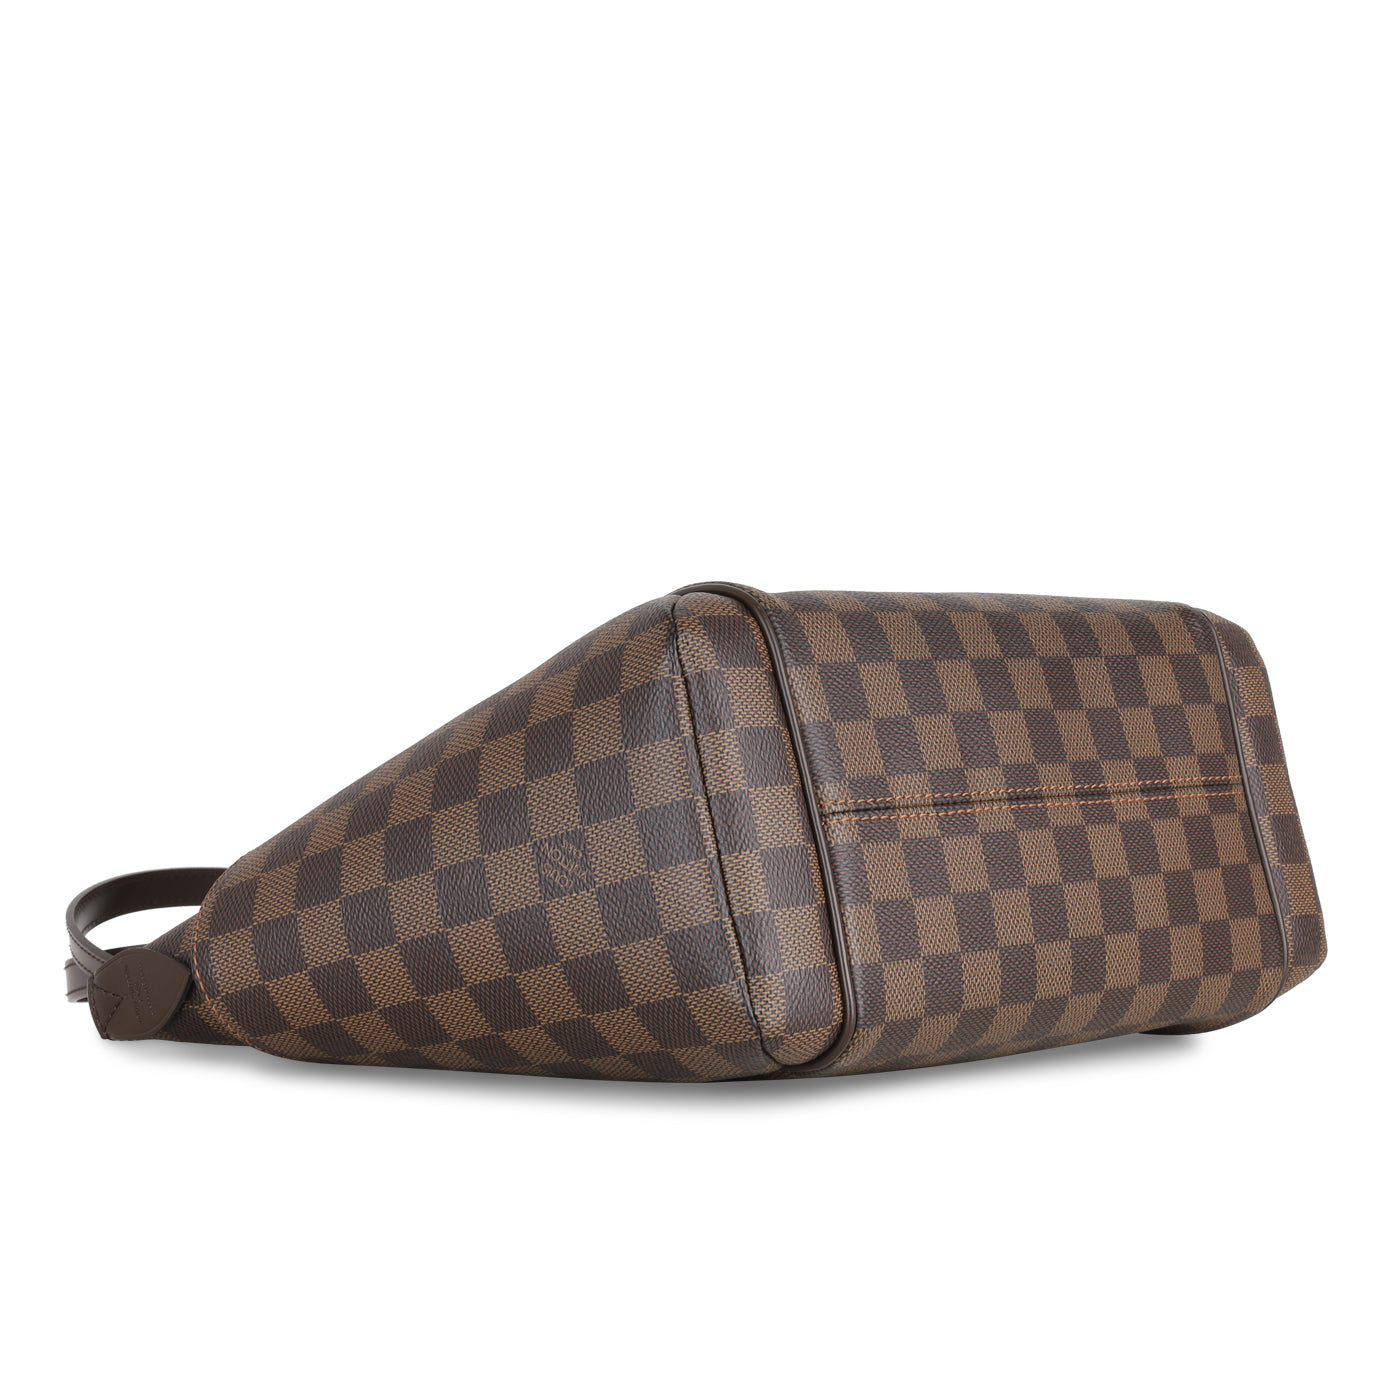 Louis Vuitton Totally mm in Damier Ebene Coated Canvas